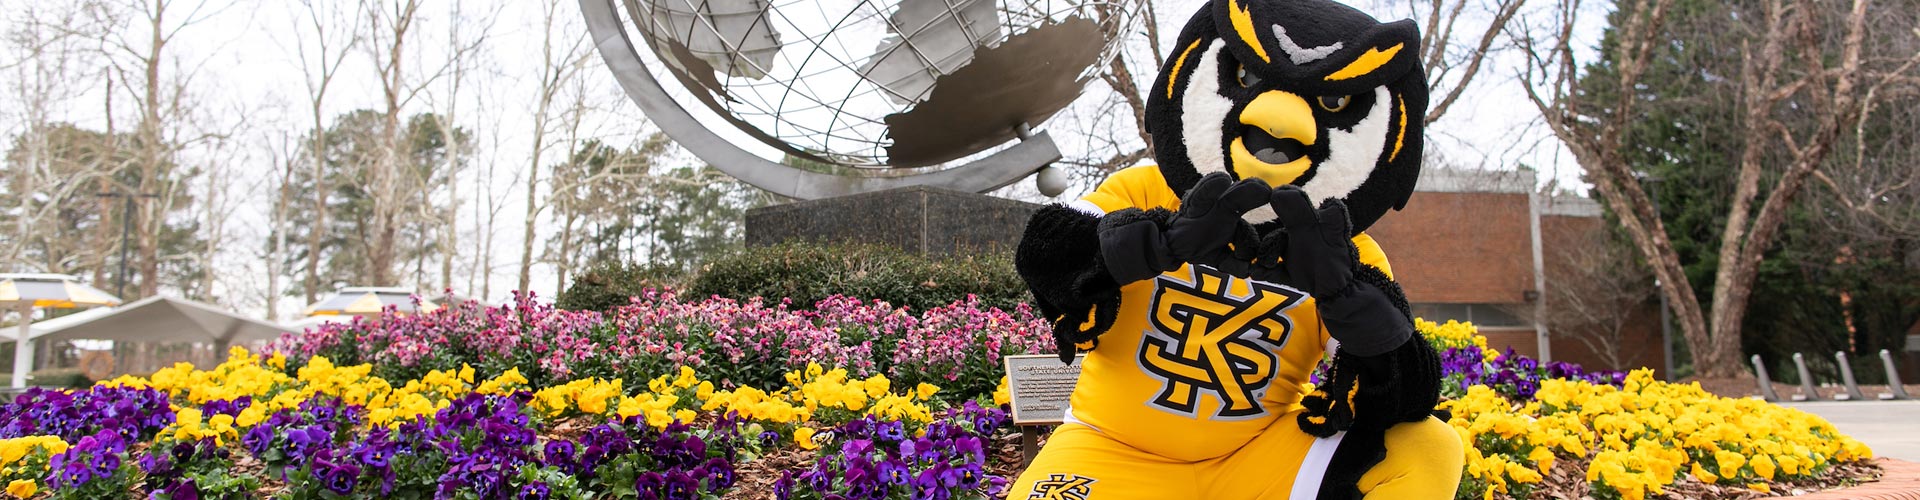 Scrappy in front of the Globe on the Marietta Campus